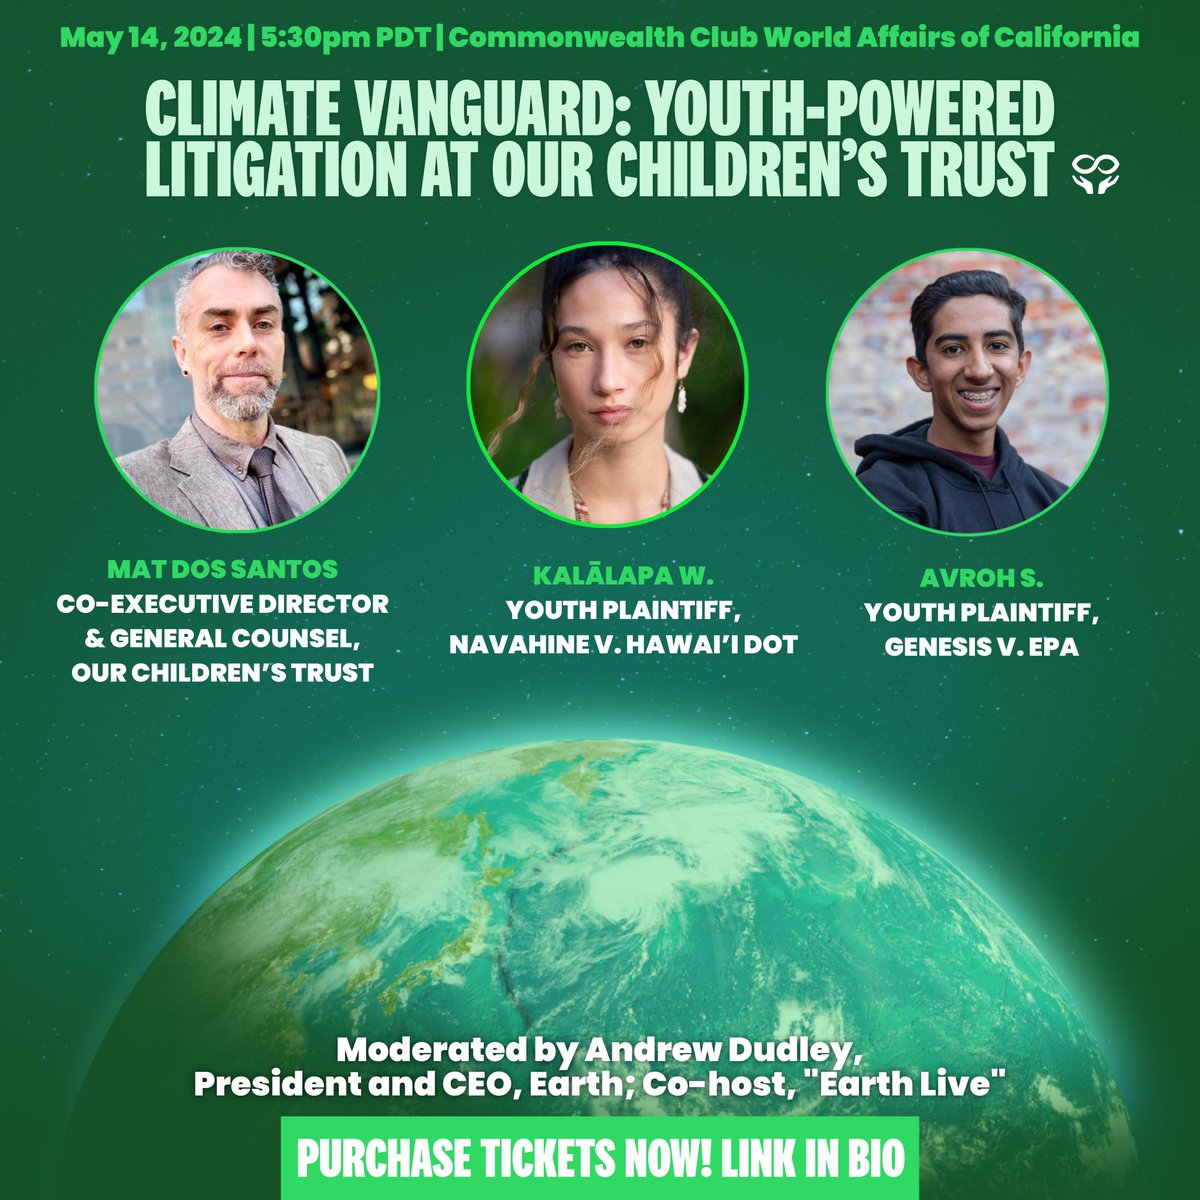 Save the date for this upcoming event hosted by @cwclub! Mat dos Santos, our Co-Executive Director & General Counsel, and youth plaintiffs Kalālapa and Avroh will dive into the various groundbreaking youth-led climate cases brought by OCT. Tickets:bit.ly/3UNWxqW